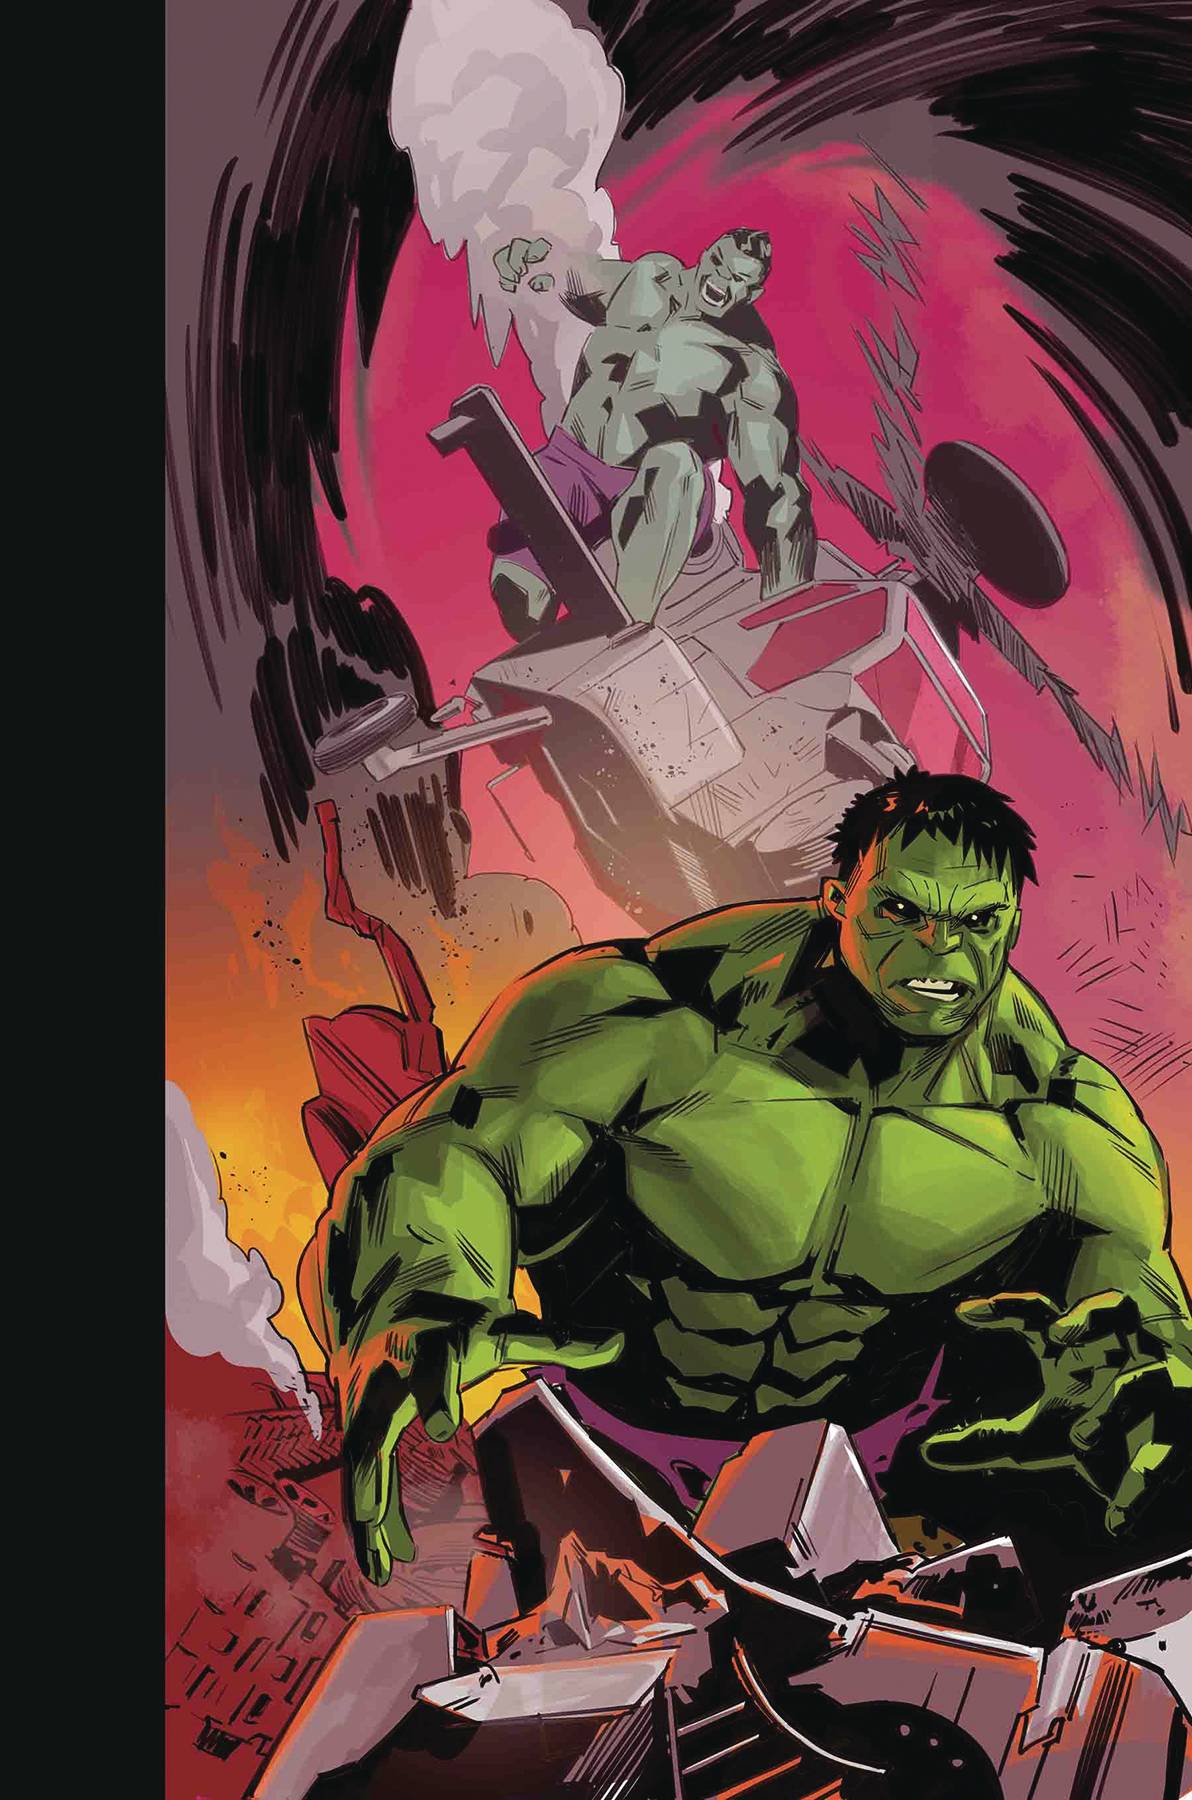 GENERATIONS: BANNER HULK AND THE TOTALLY AWESOME HULK#1